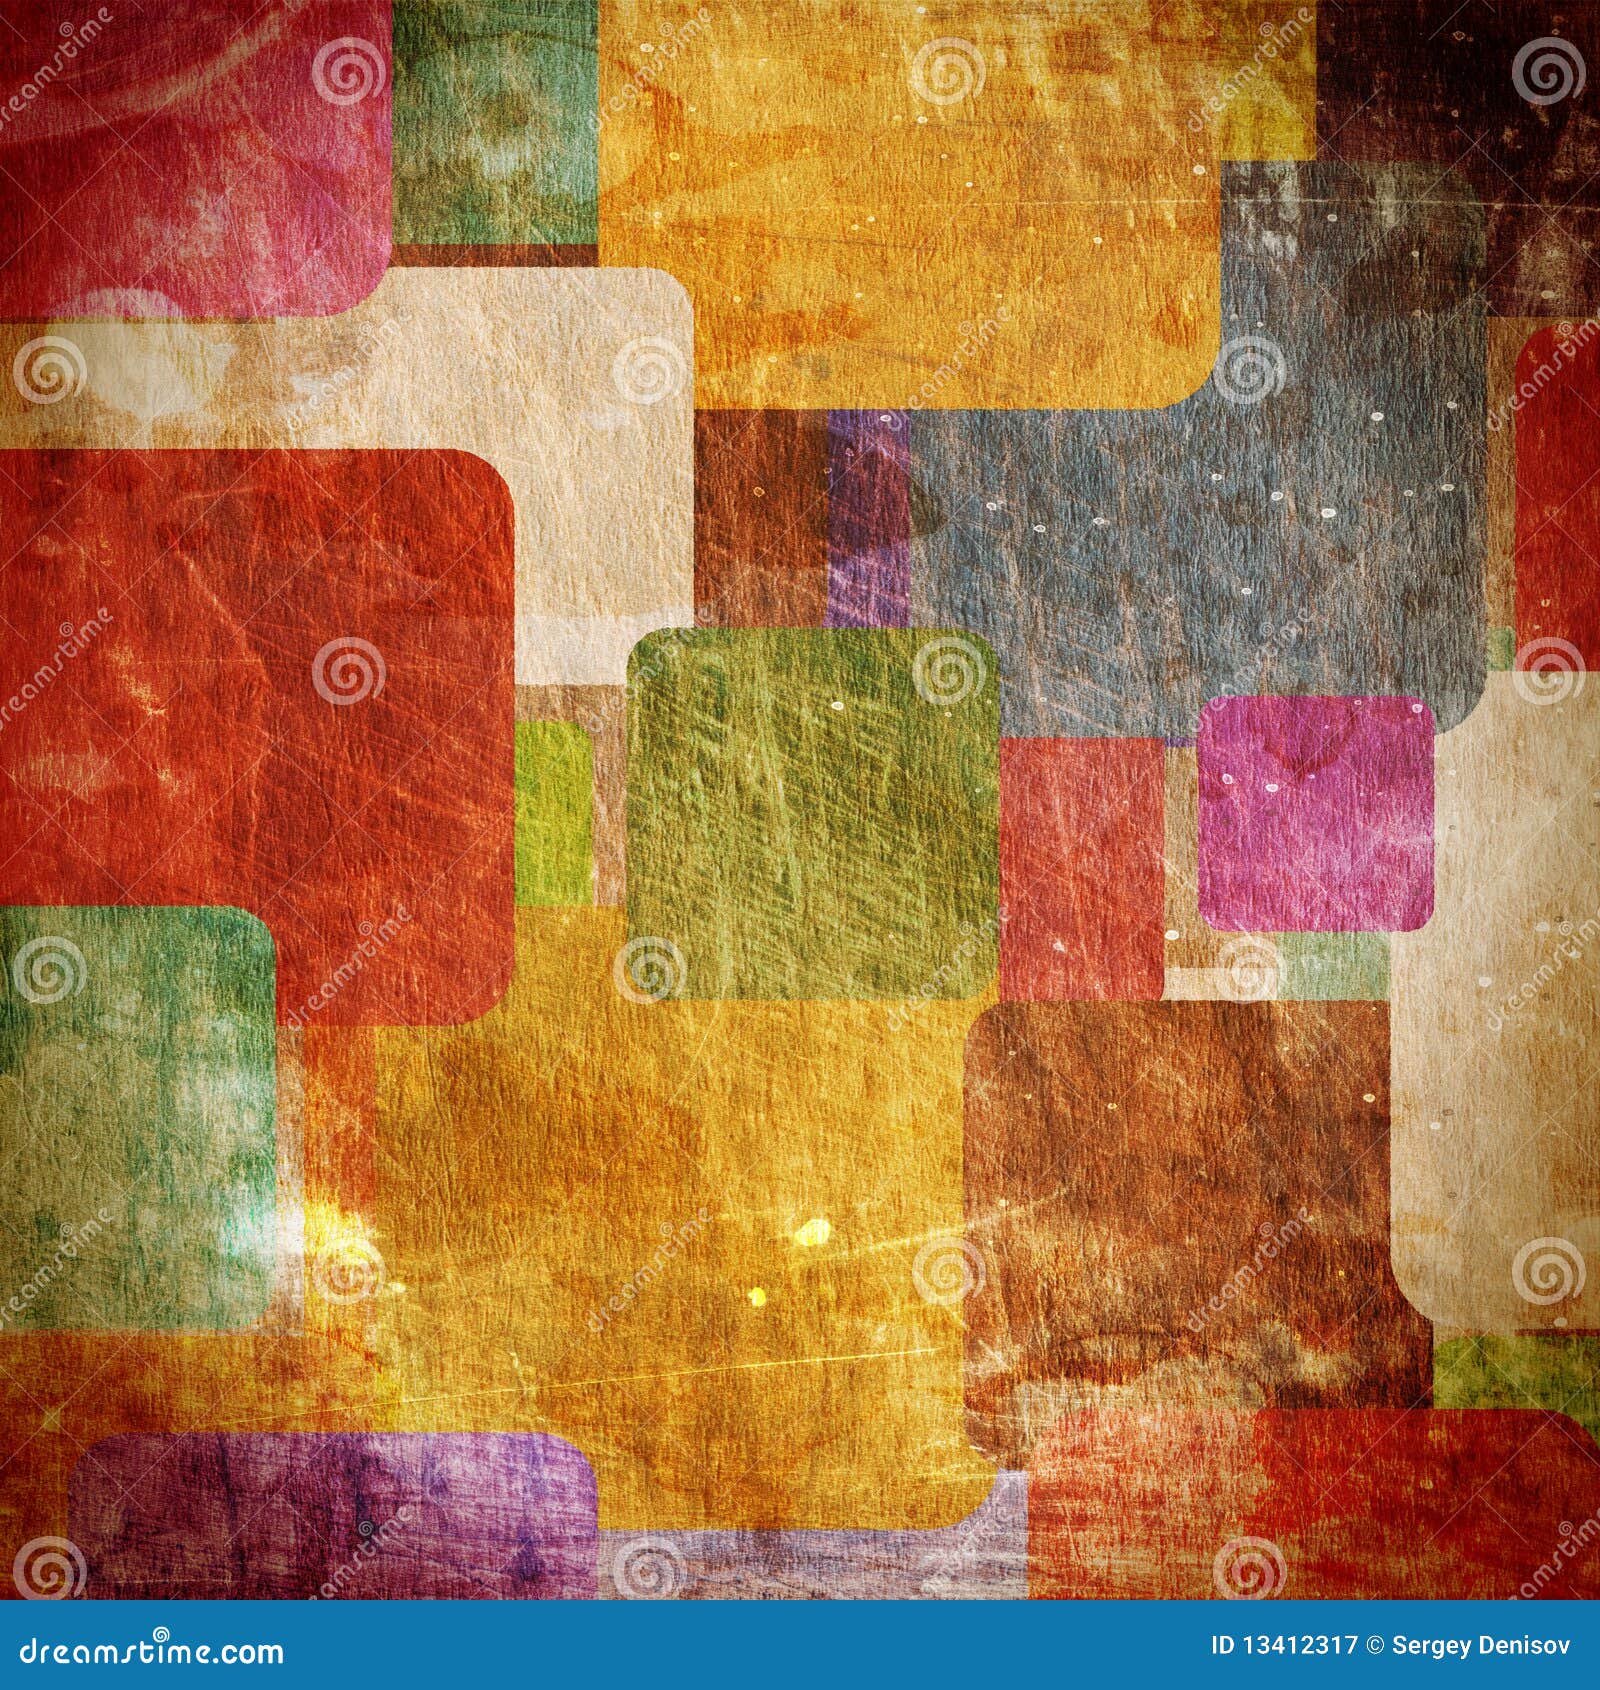 Squares on the grunge wall stock illustration. Illustration of cubes ...